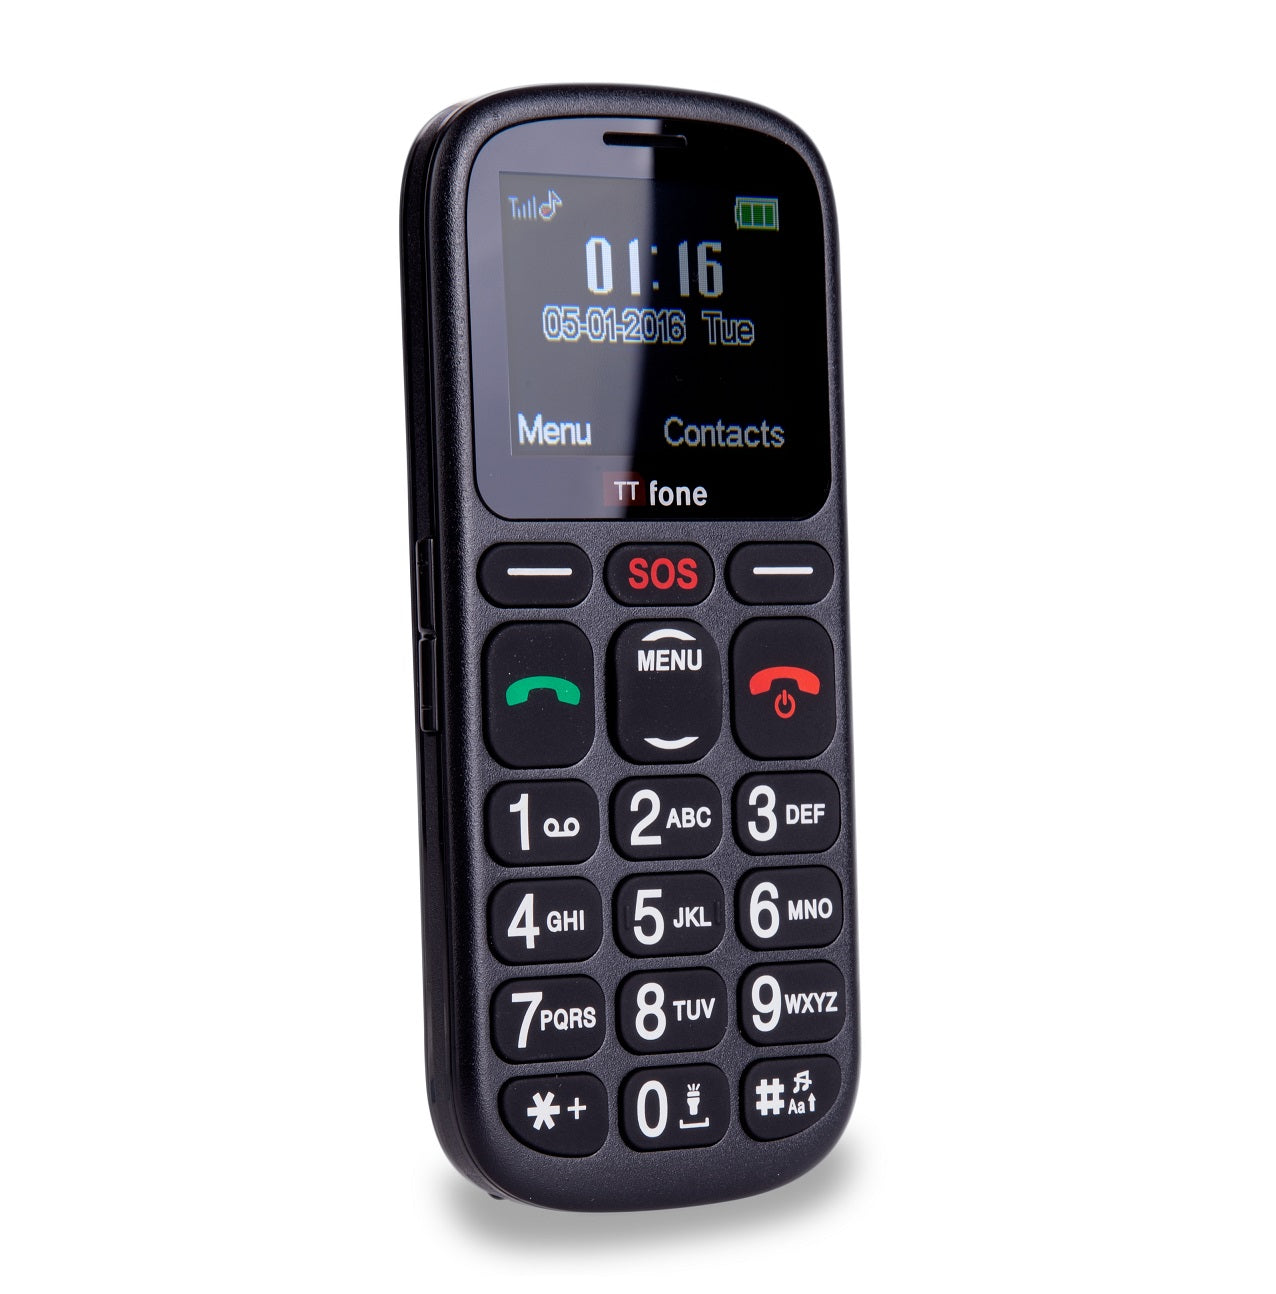 TTfone Comet TT100 Warehouse Deals with O2 Pay As You Go